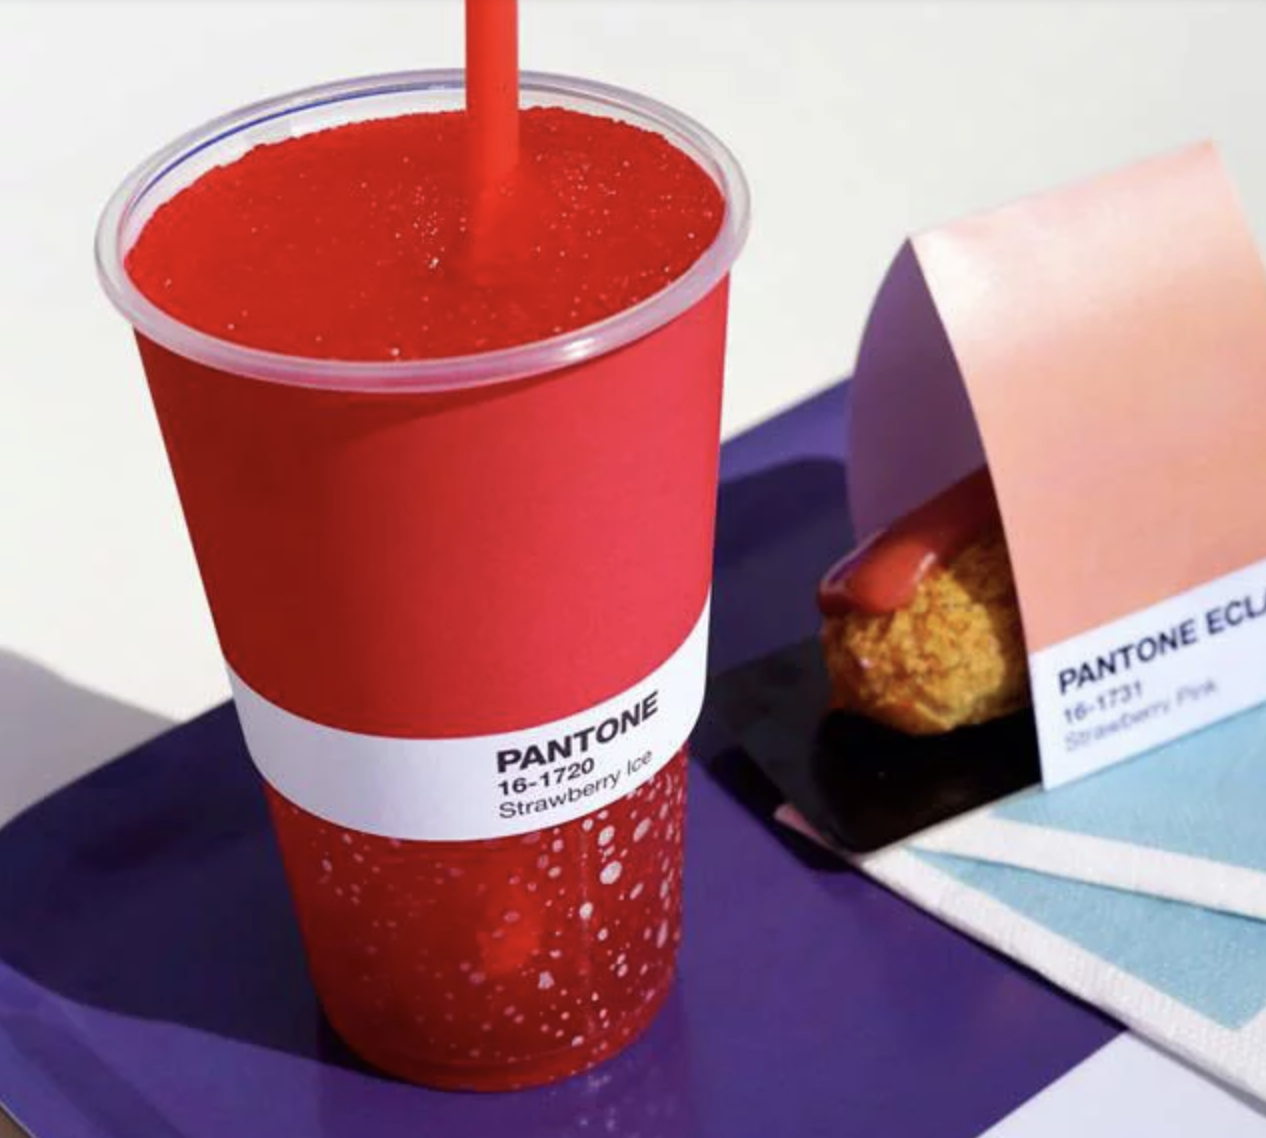 One of the beverages available for purchase at the Pantone Cafe pop-up shop